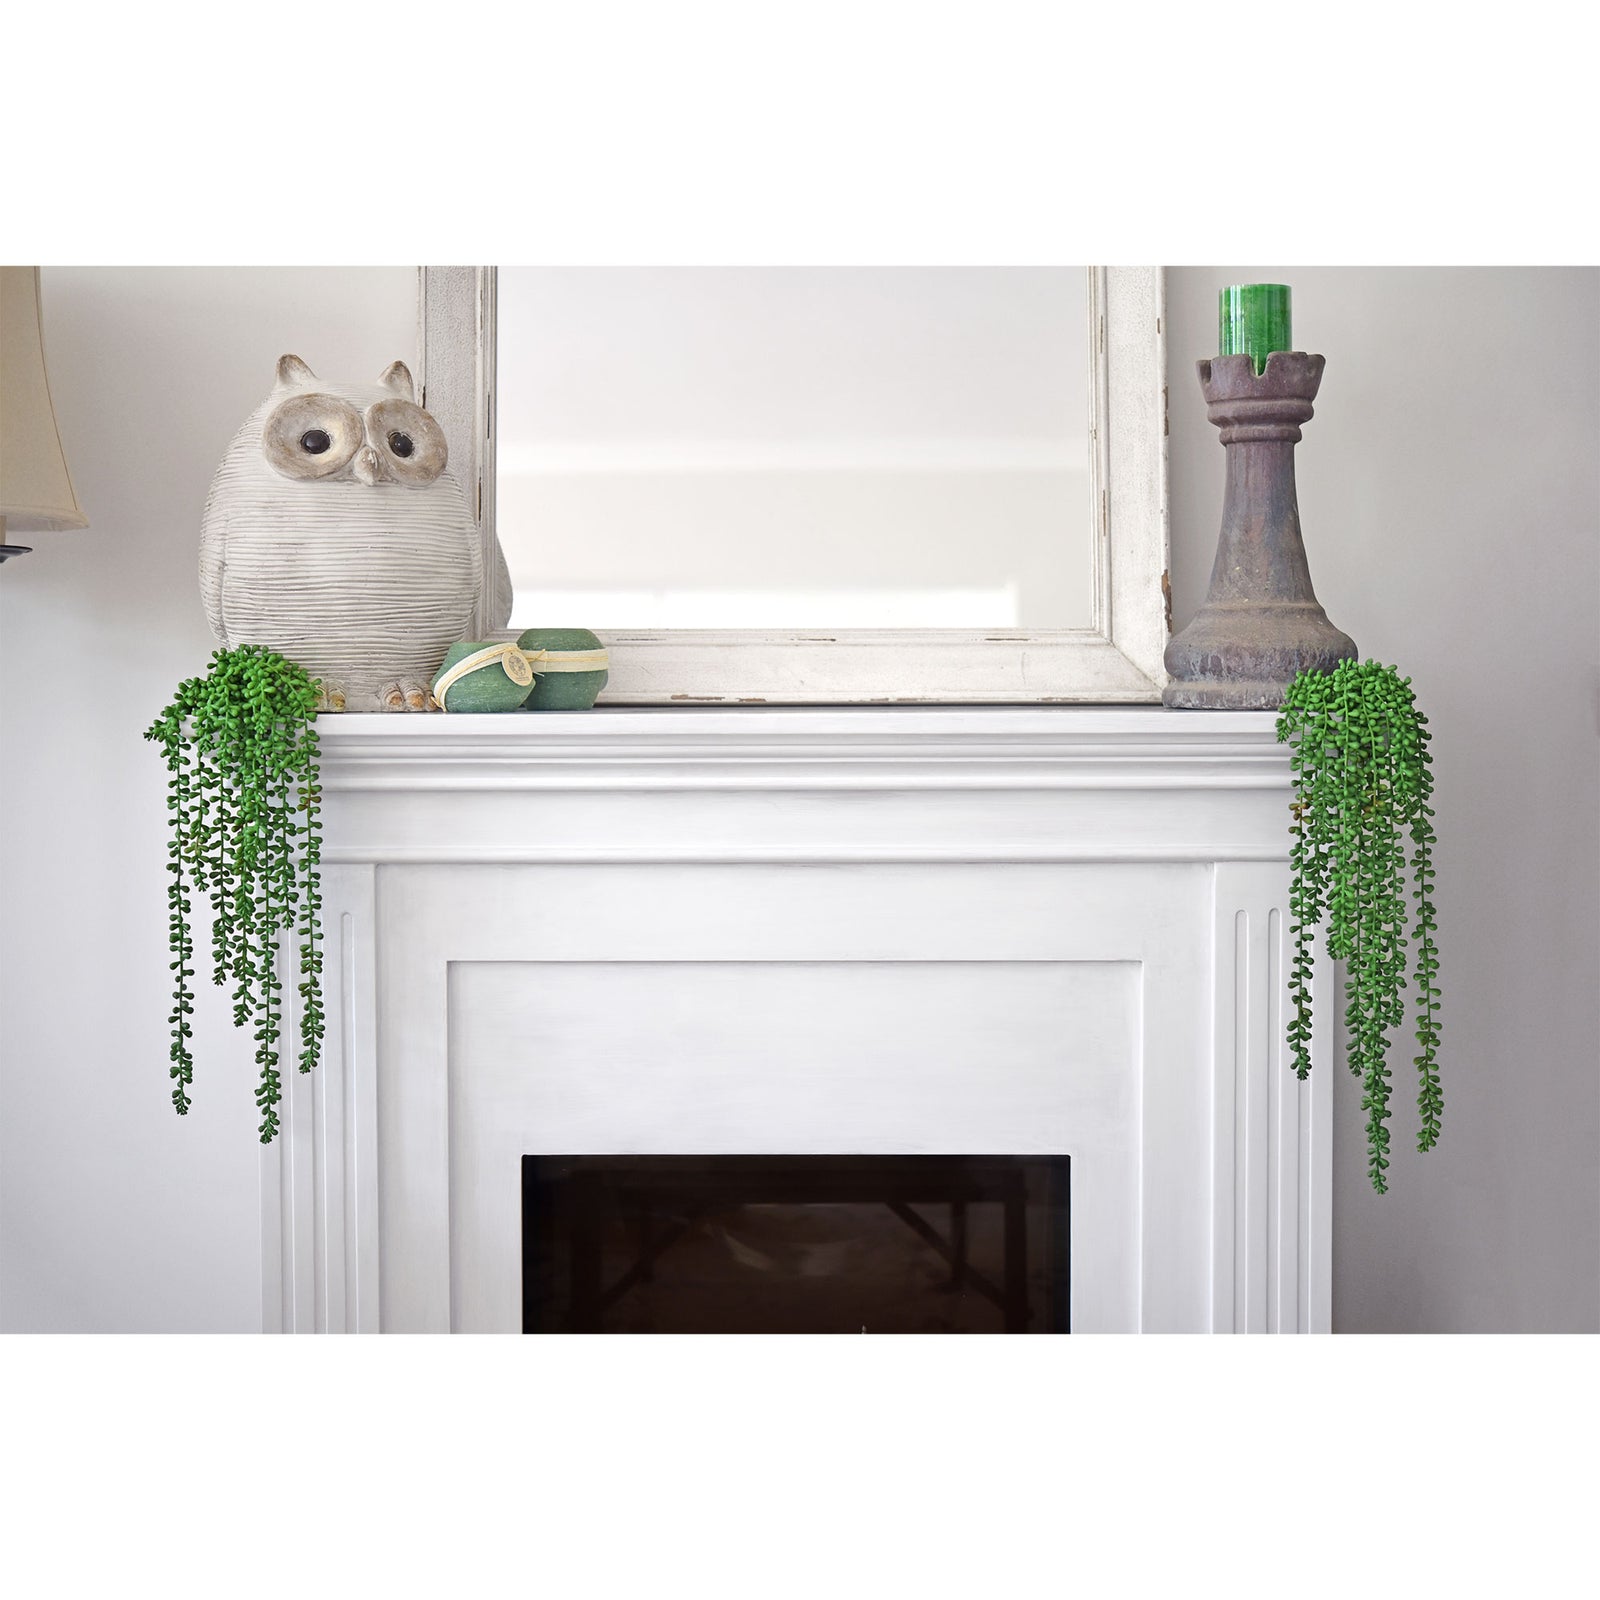 4pcs Artificial Succulents Hanging Plants Fake String of Pearls